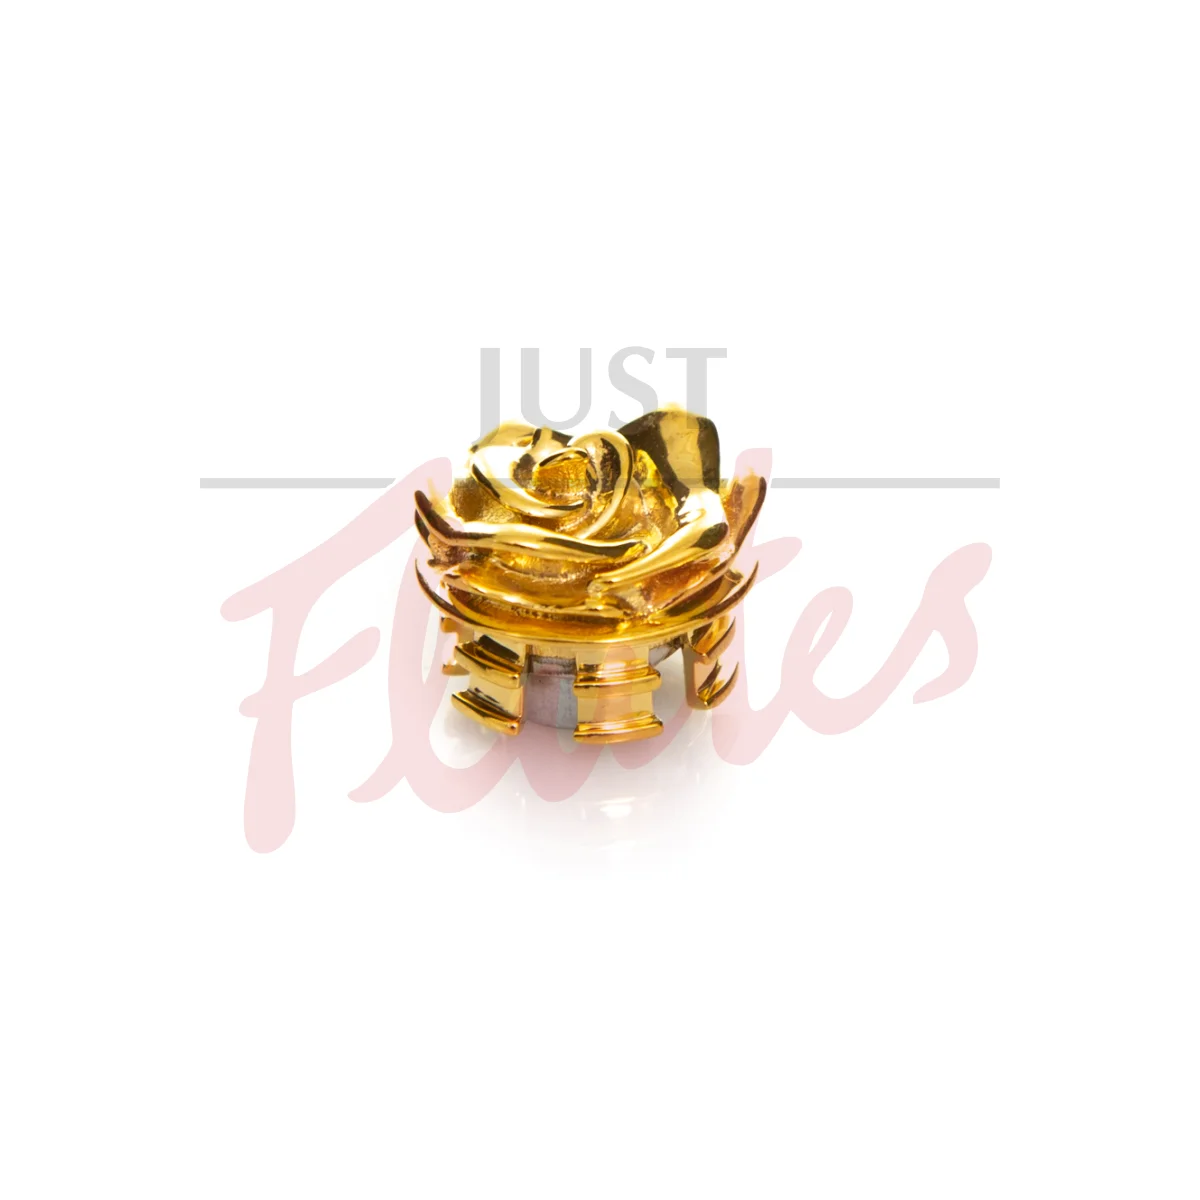 Flutealot Decorative Flute Crown, Yellow Gold-Plated Rose